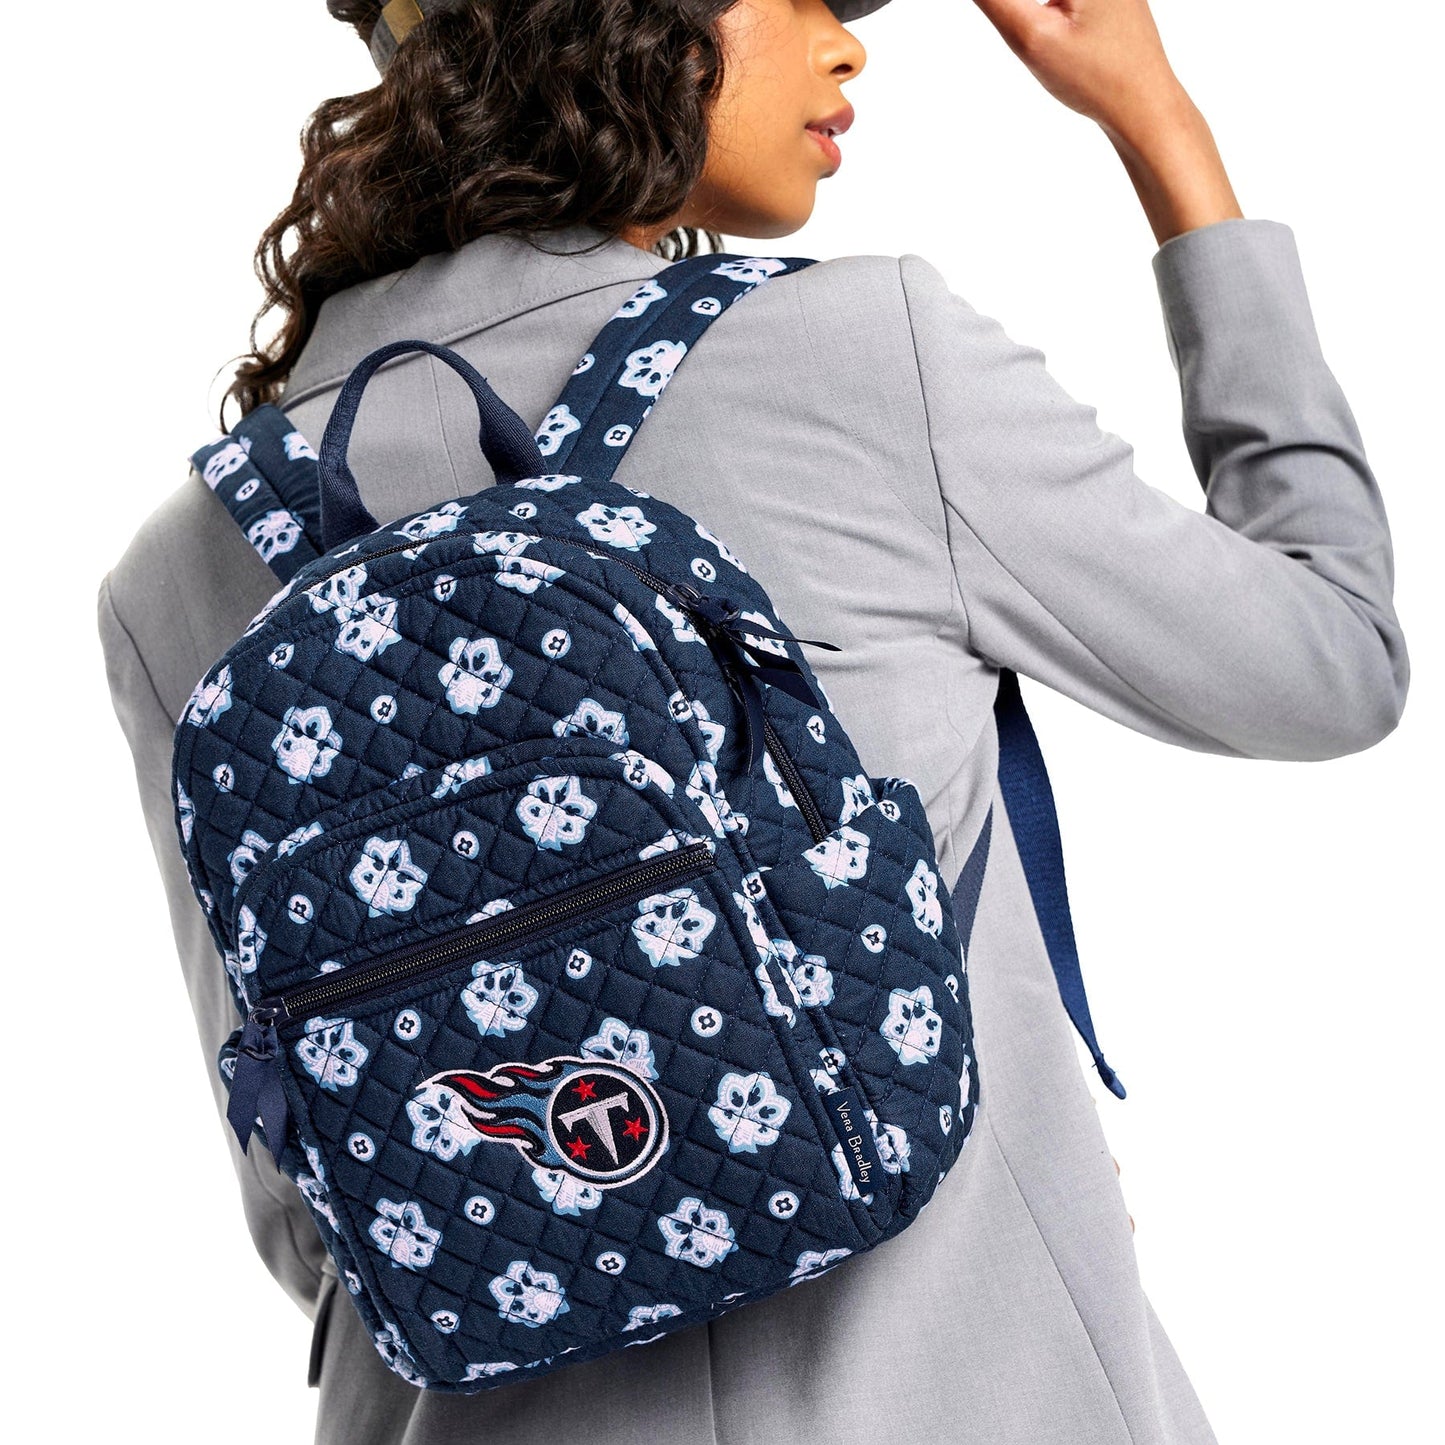 NFL Small Backpack